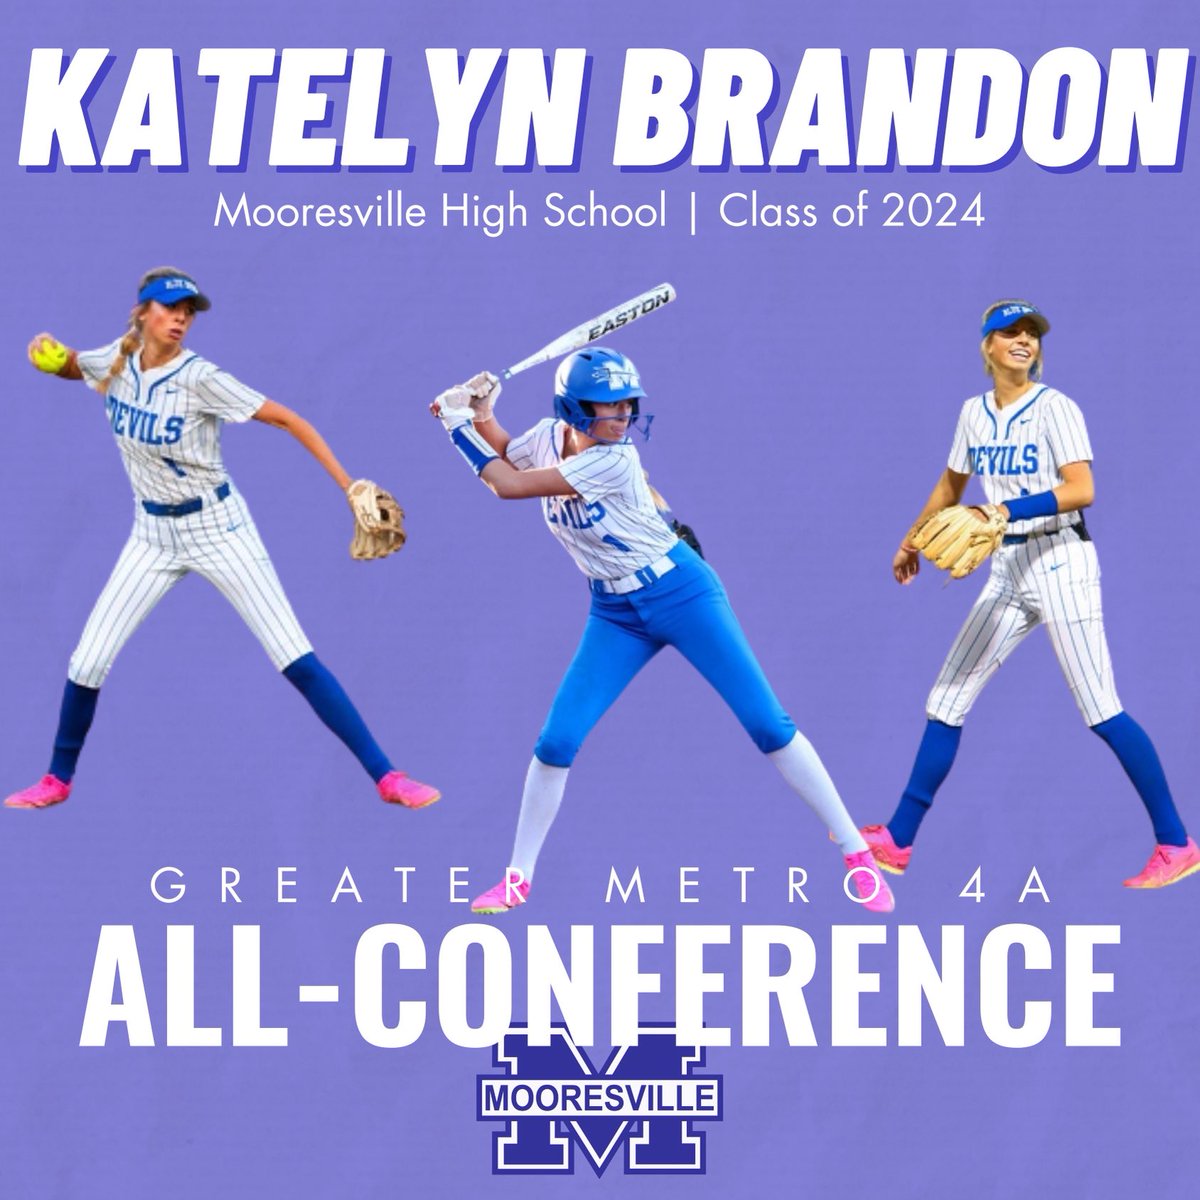 Let’s celebrate our first All Conference selection!!!